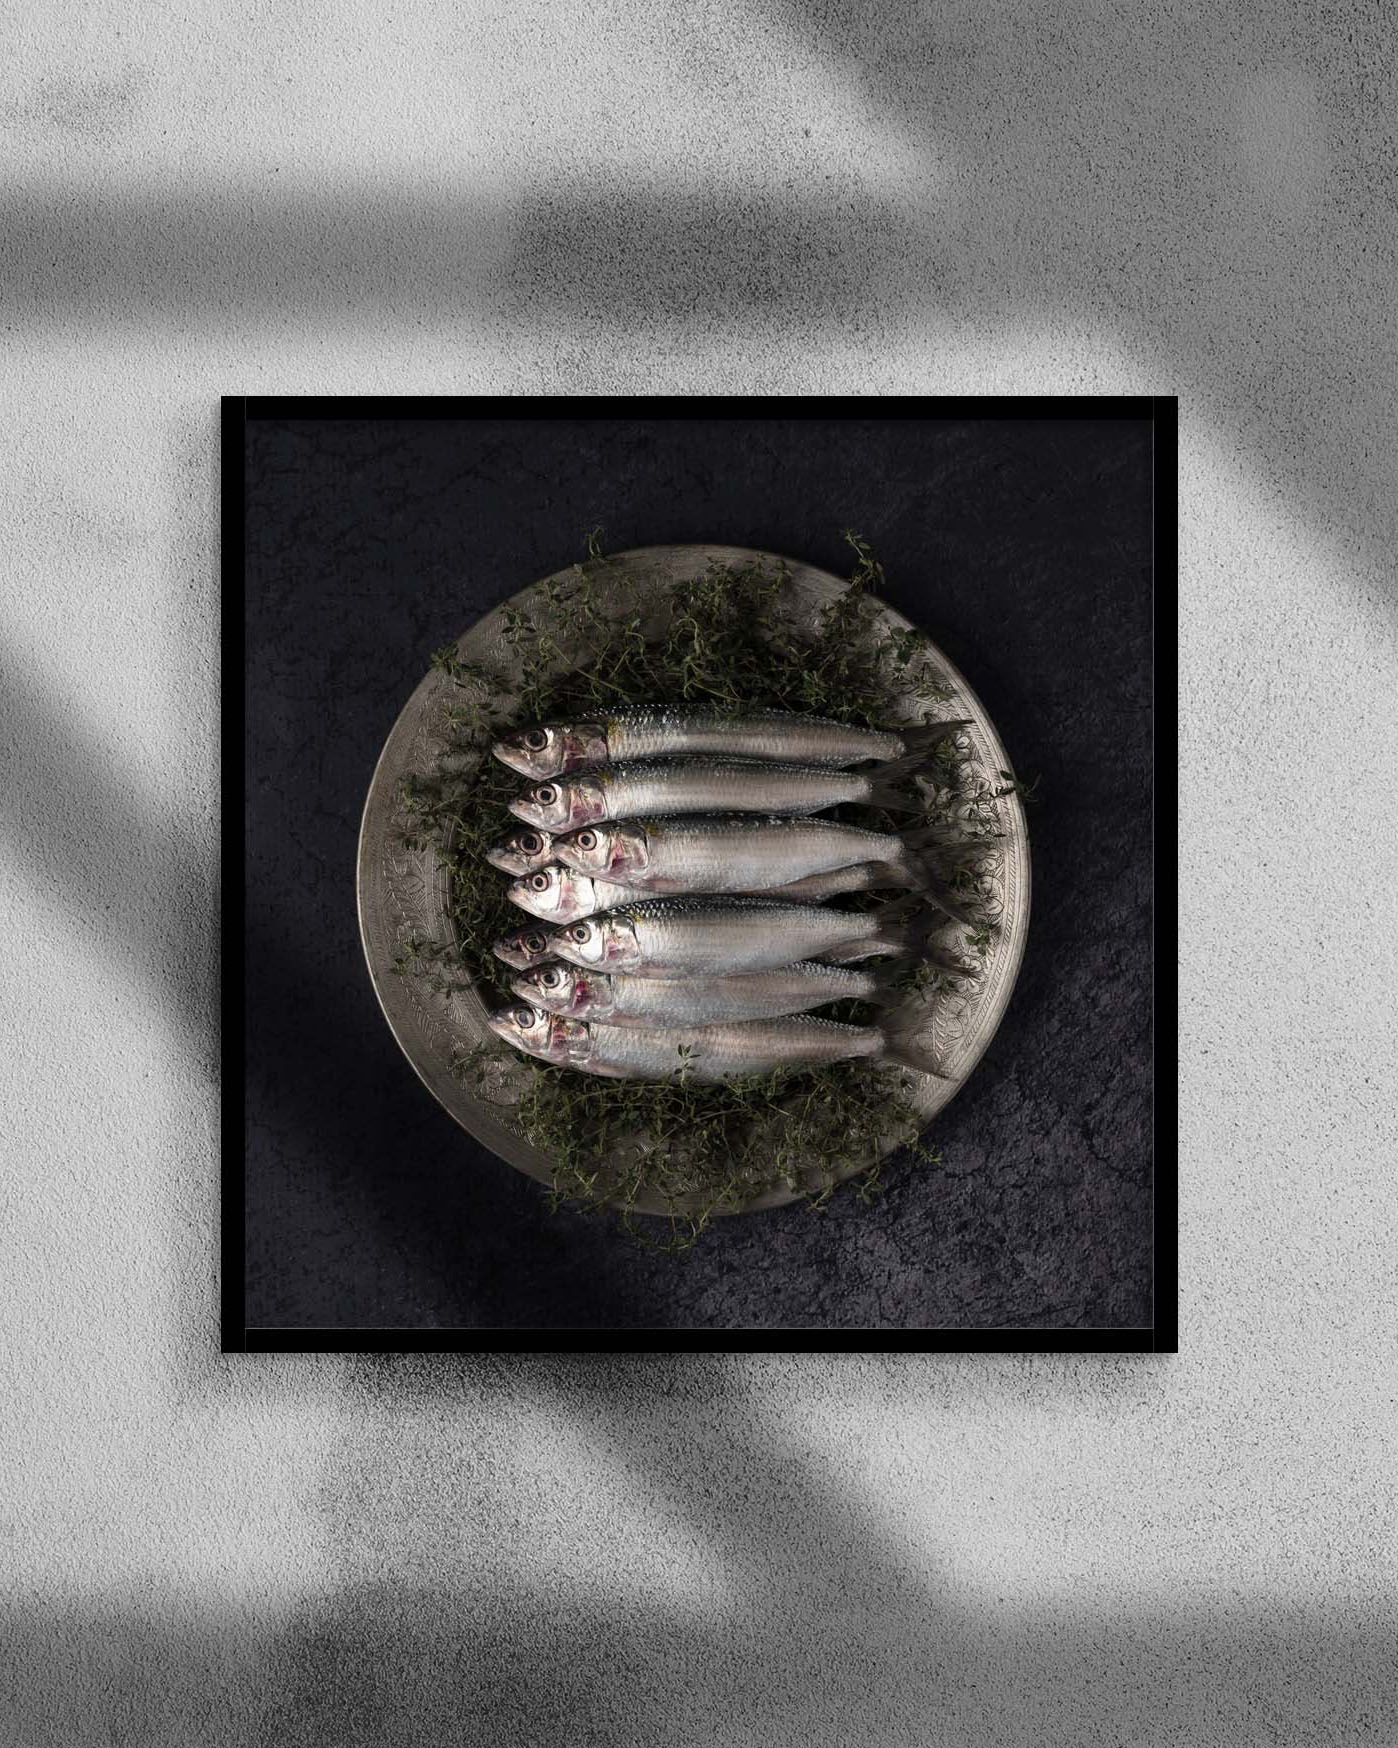 Title: Silver lines and sardines